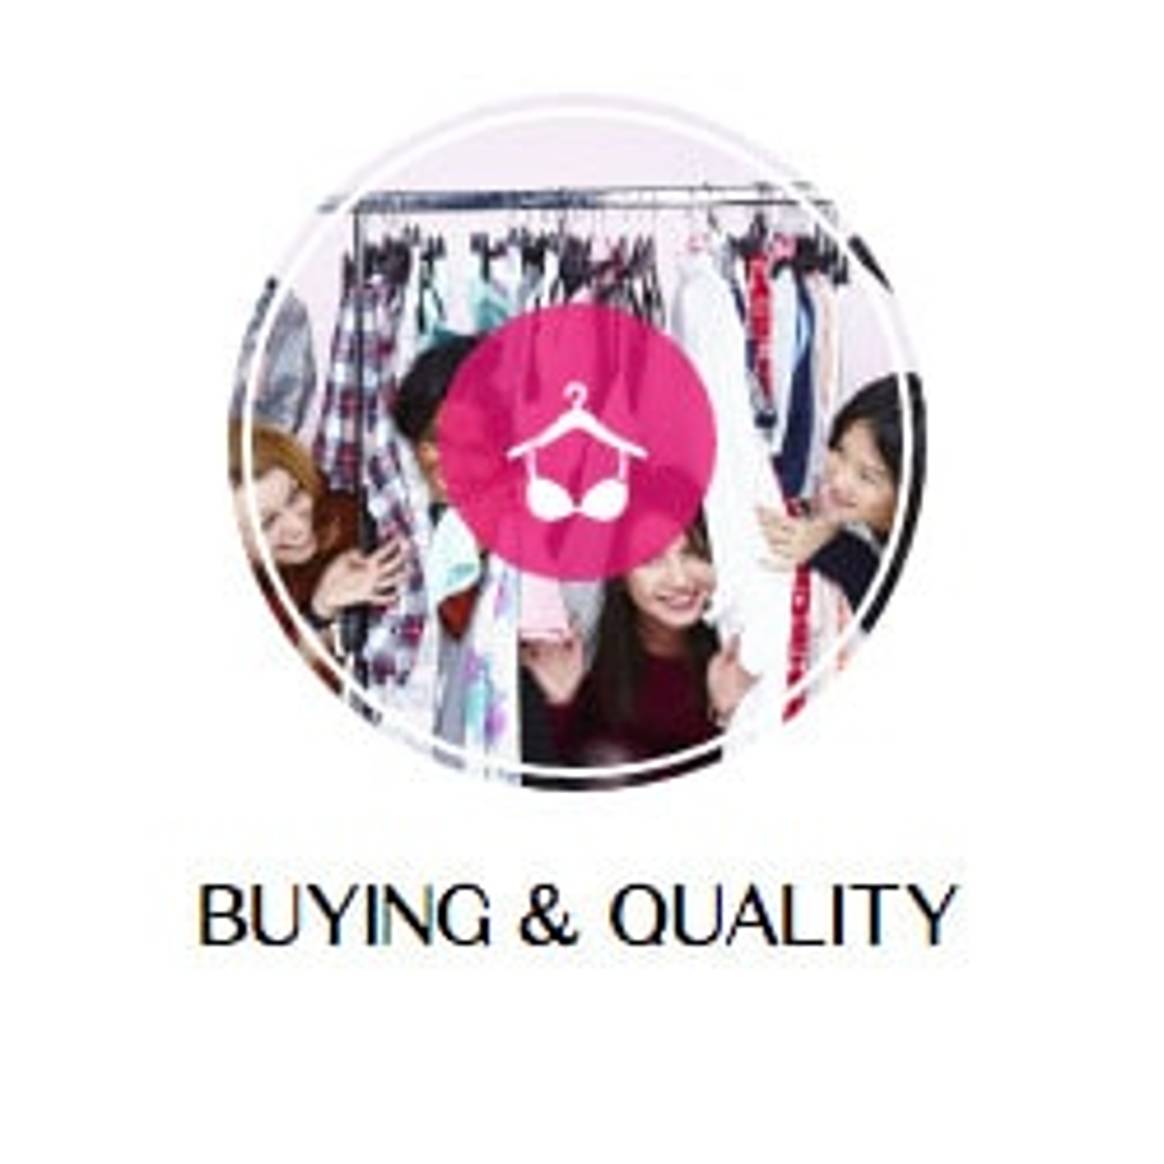 Buying & Quality